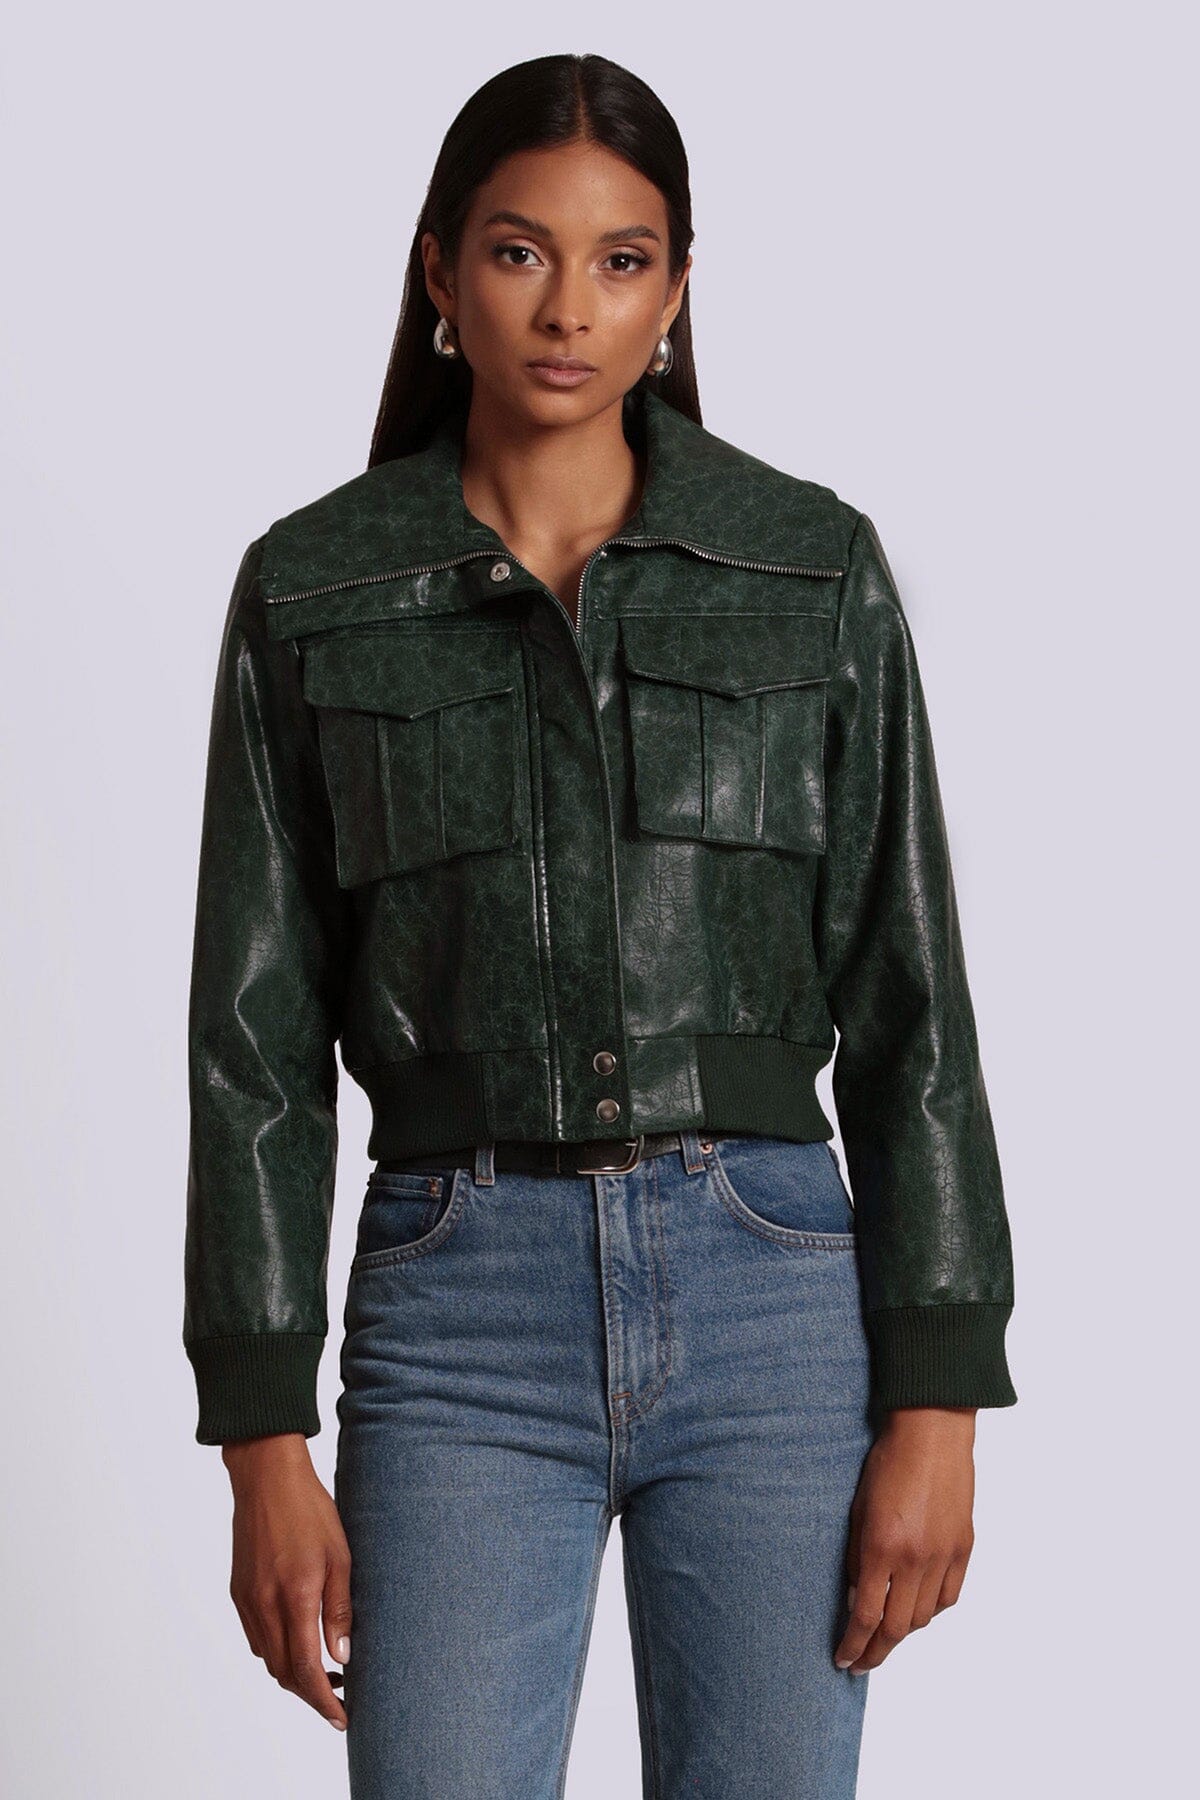 Emerald green faux ever leather cropped aviator jacket coat - women's figure flattering office to date night jackets